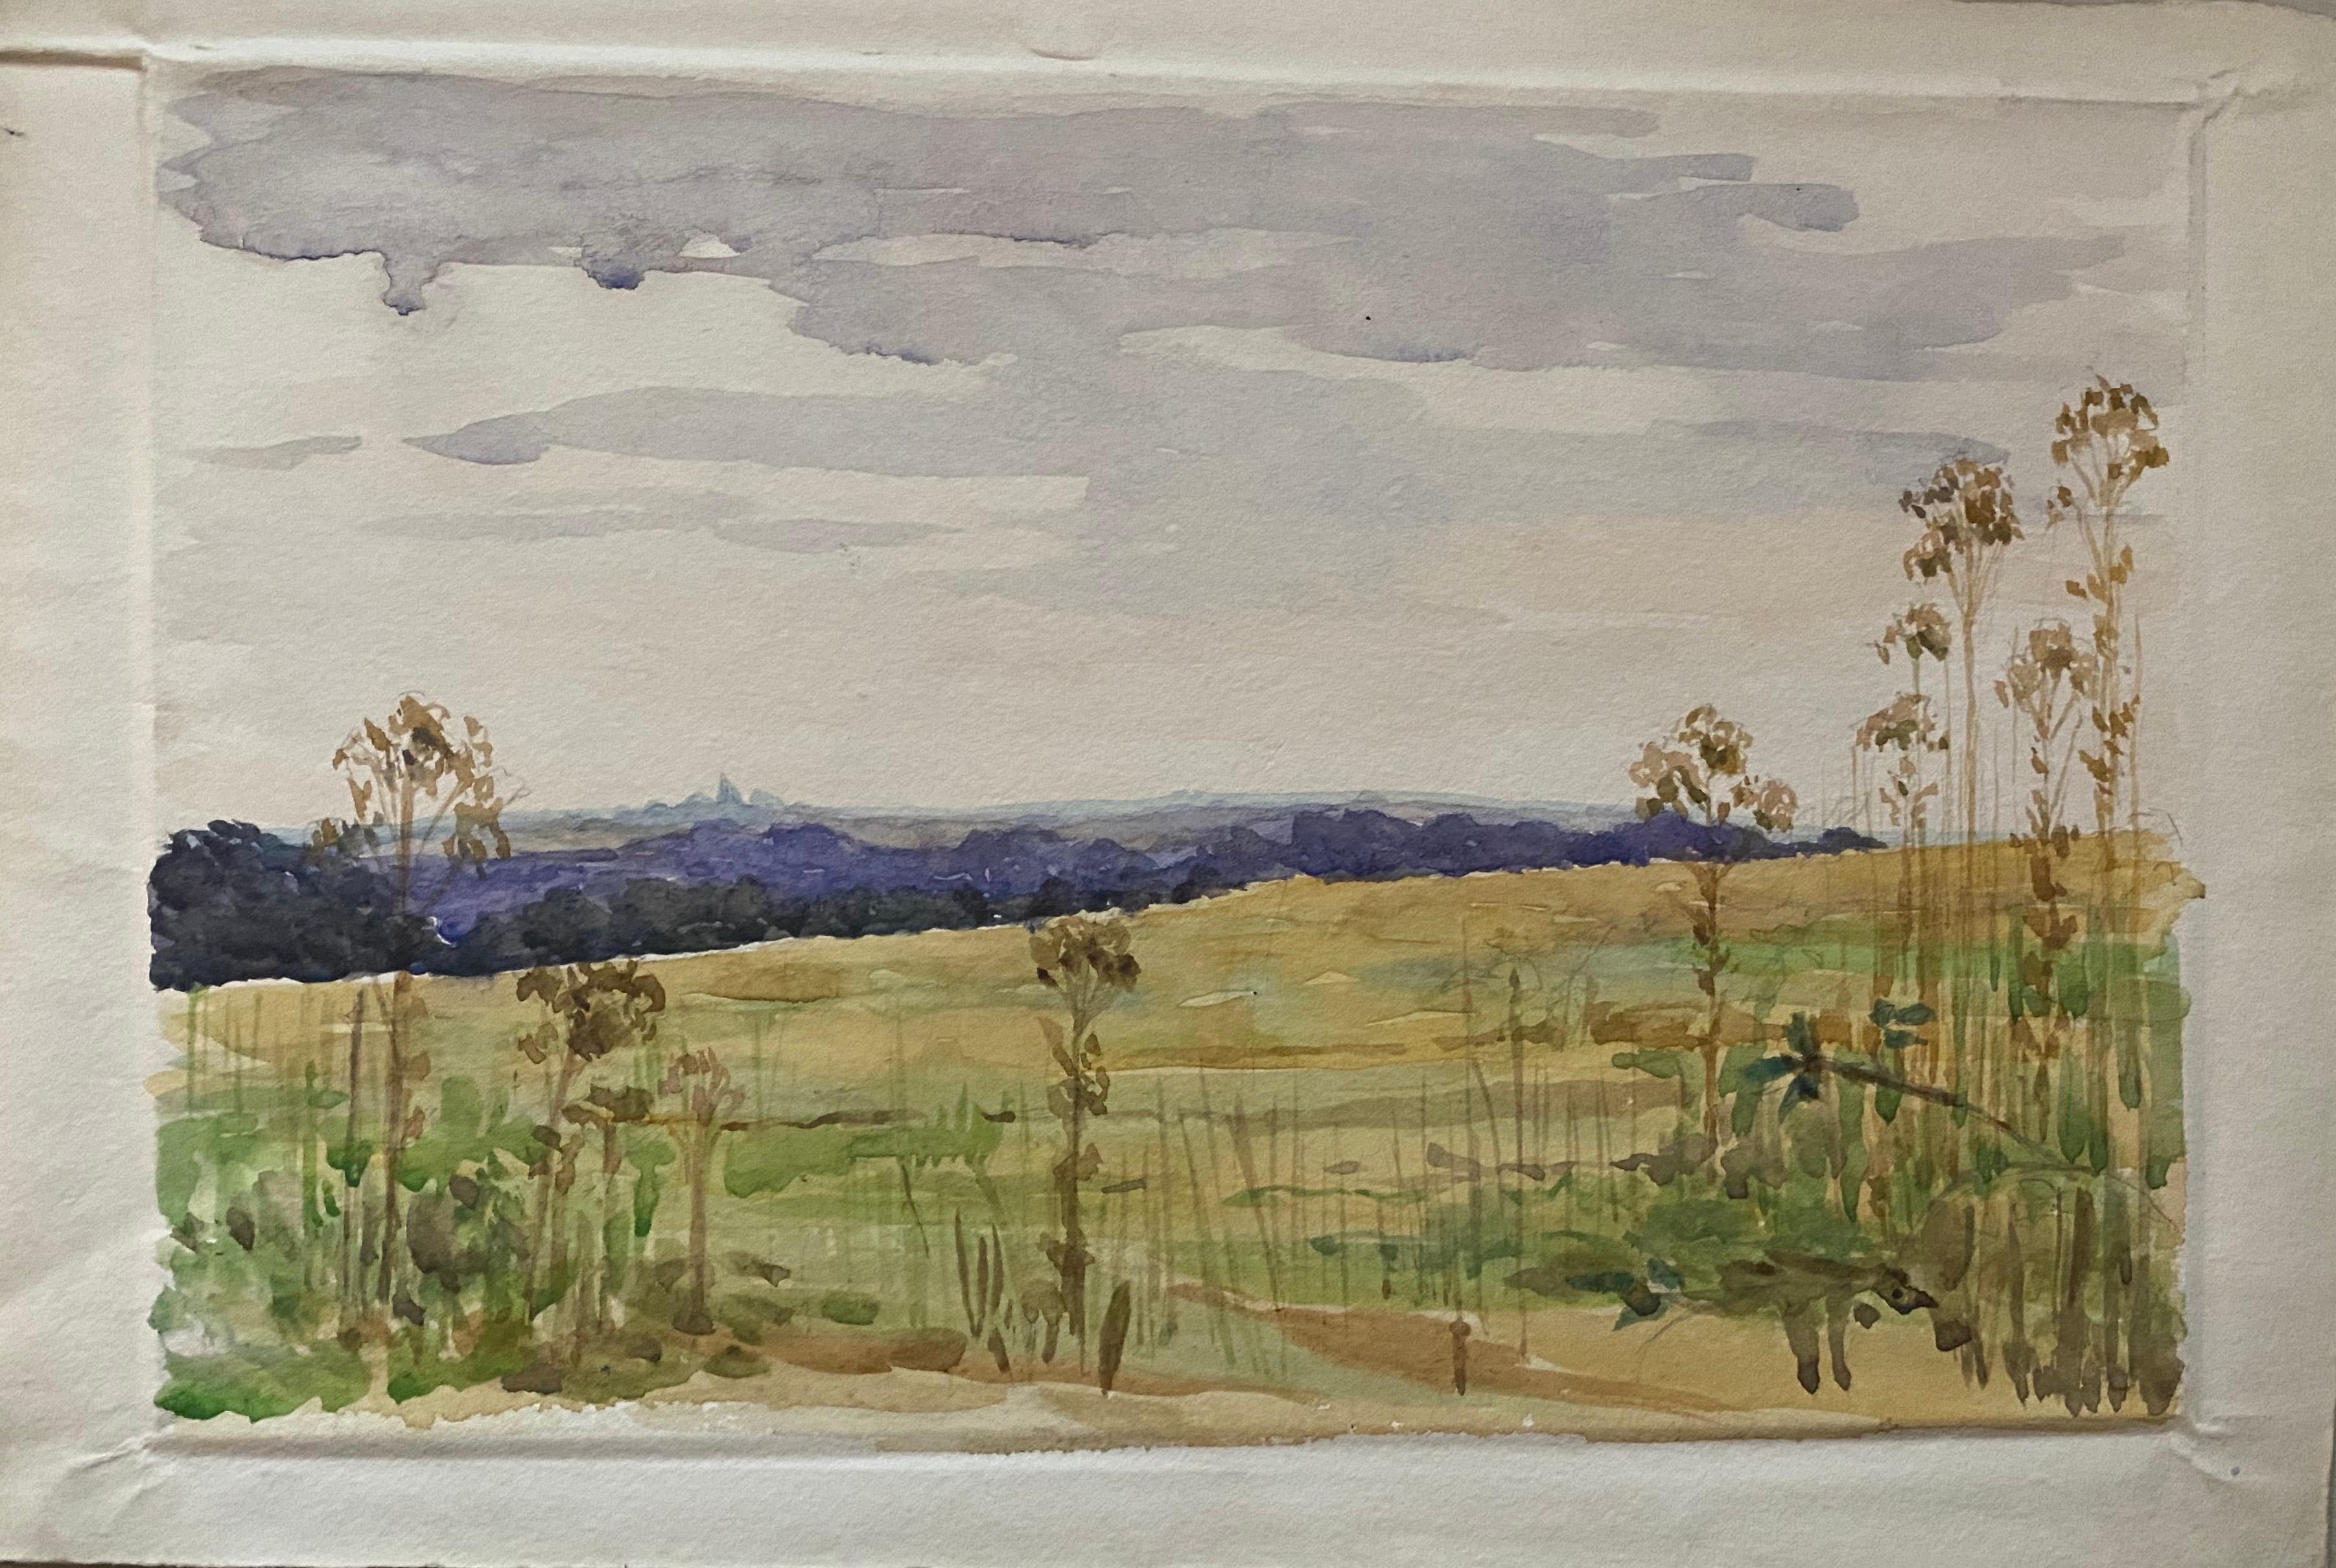 Crop Meadow
English School, early 1900's
Original watercolor painting on artists paper, unframed
Overall paper size: 8 x 11.25 inches


From a large private collection of English watercolor paintings, all by the same hand, we offer this